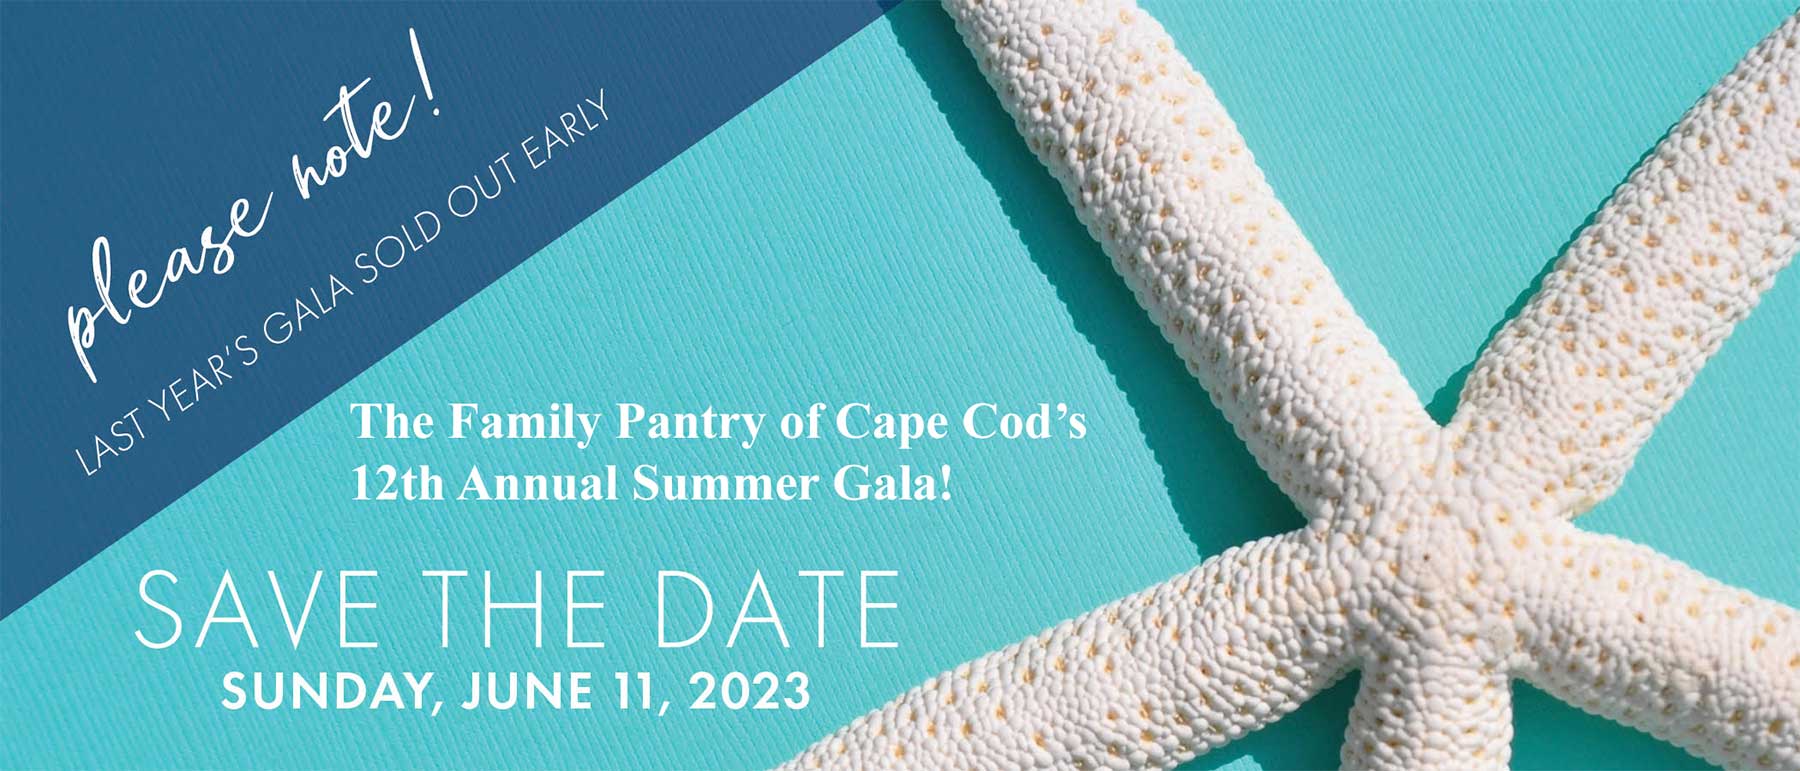 Food Pantry - The Family Pantry of Cape Cod